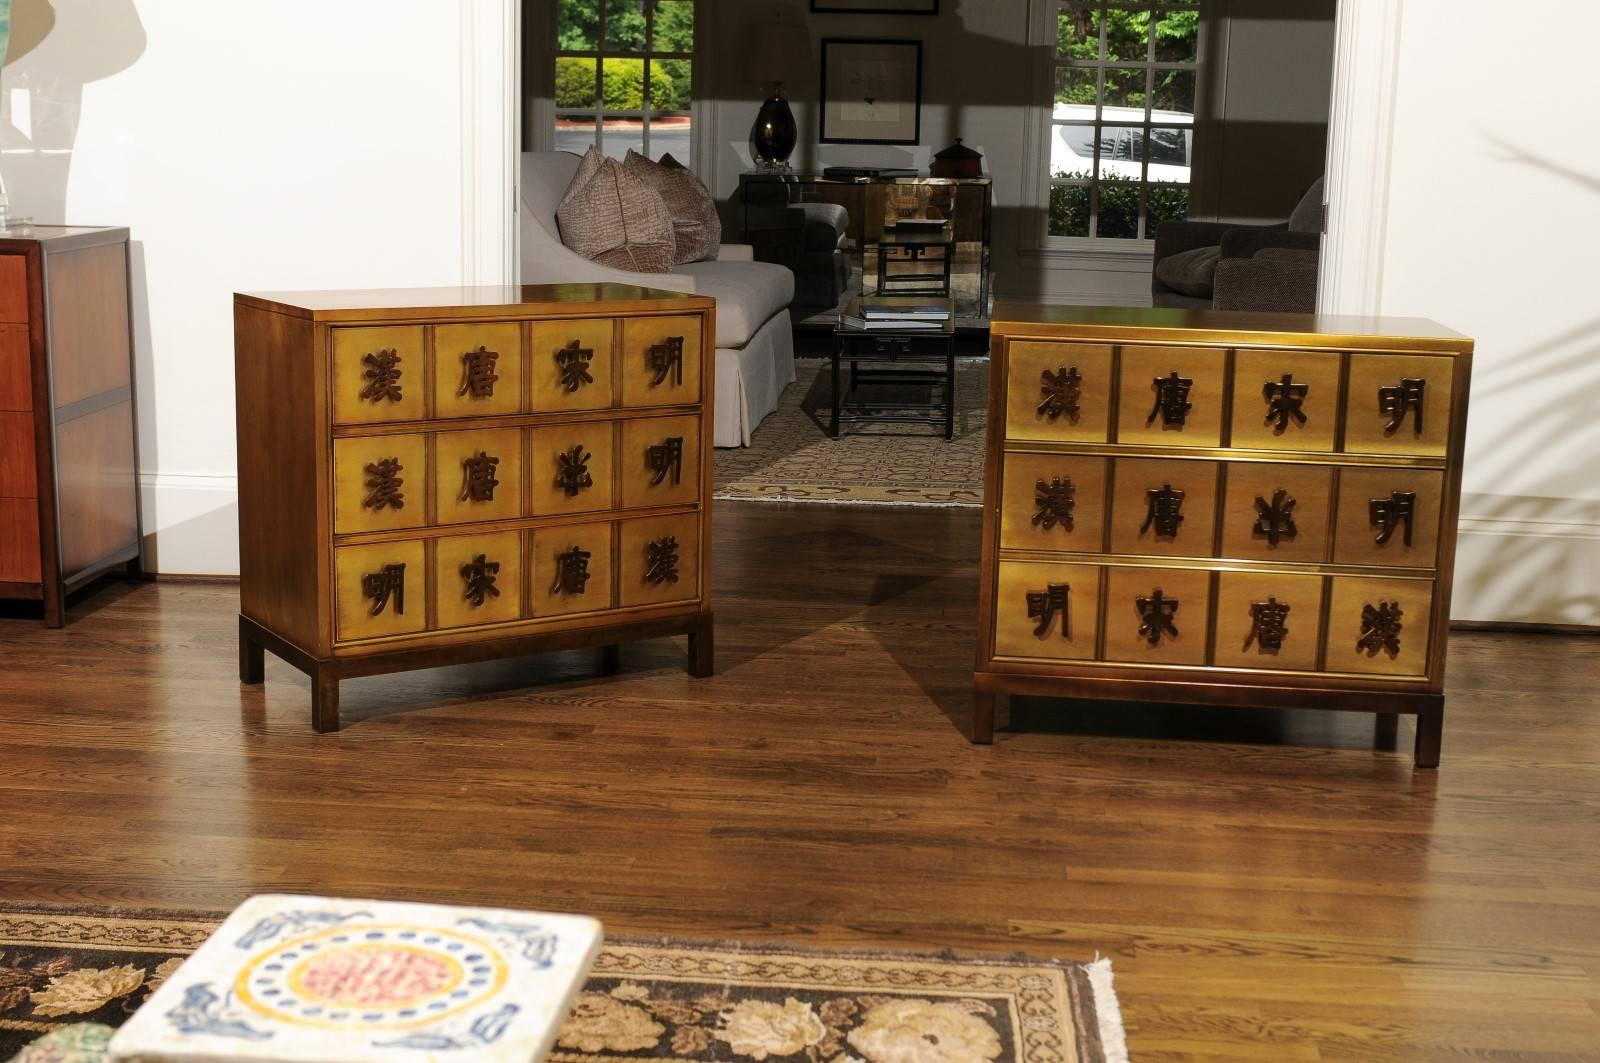 This magnificent pair of commodes is shipped as professionally photographed and described in the listing narrative: Meticulously professionally restored and completely installation ready.

A radiant pair of three-drawer chests by Mastercraft, circa